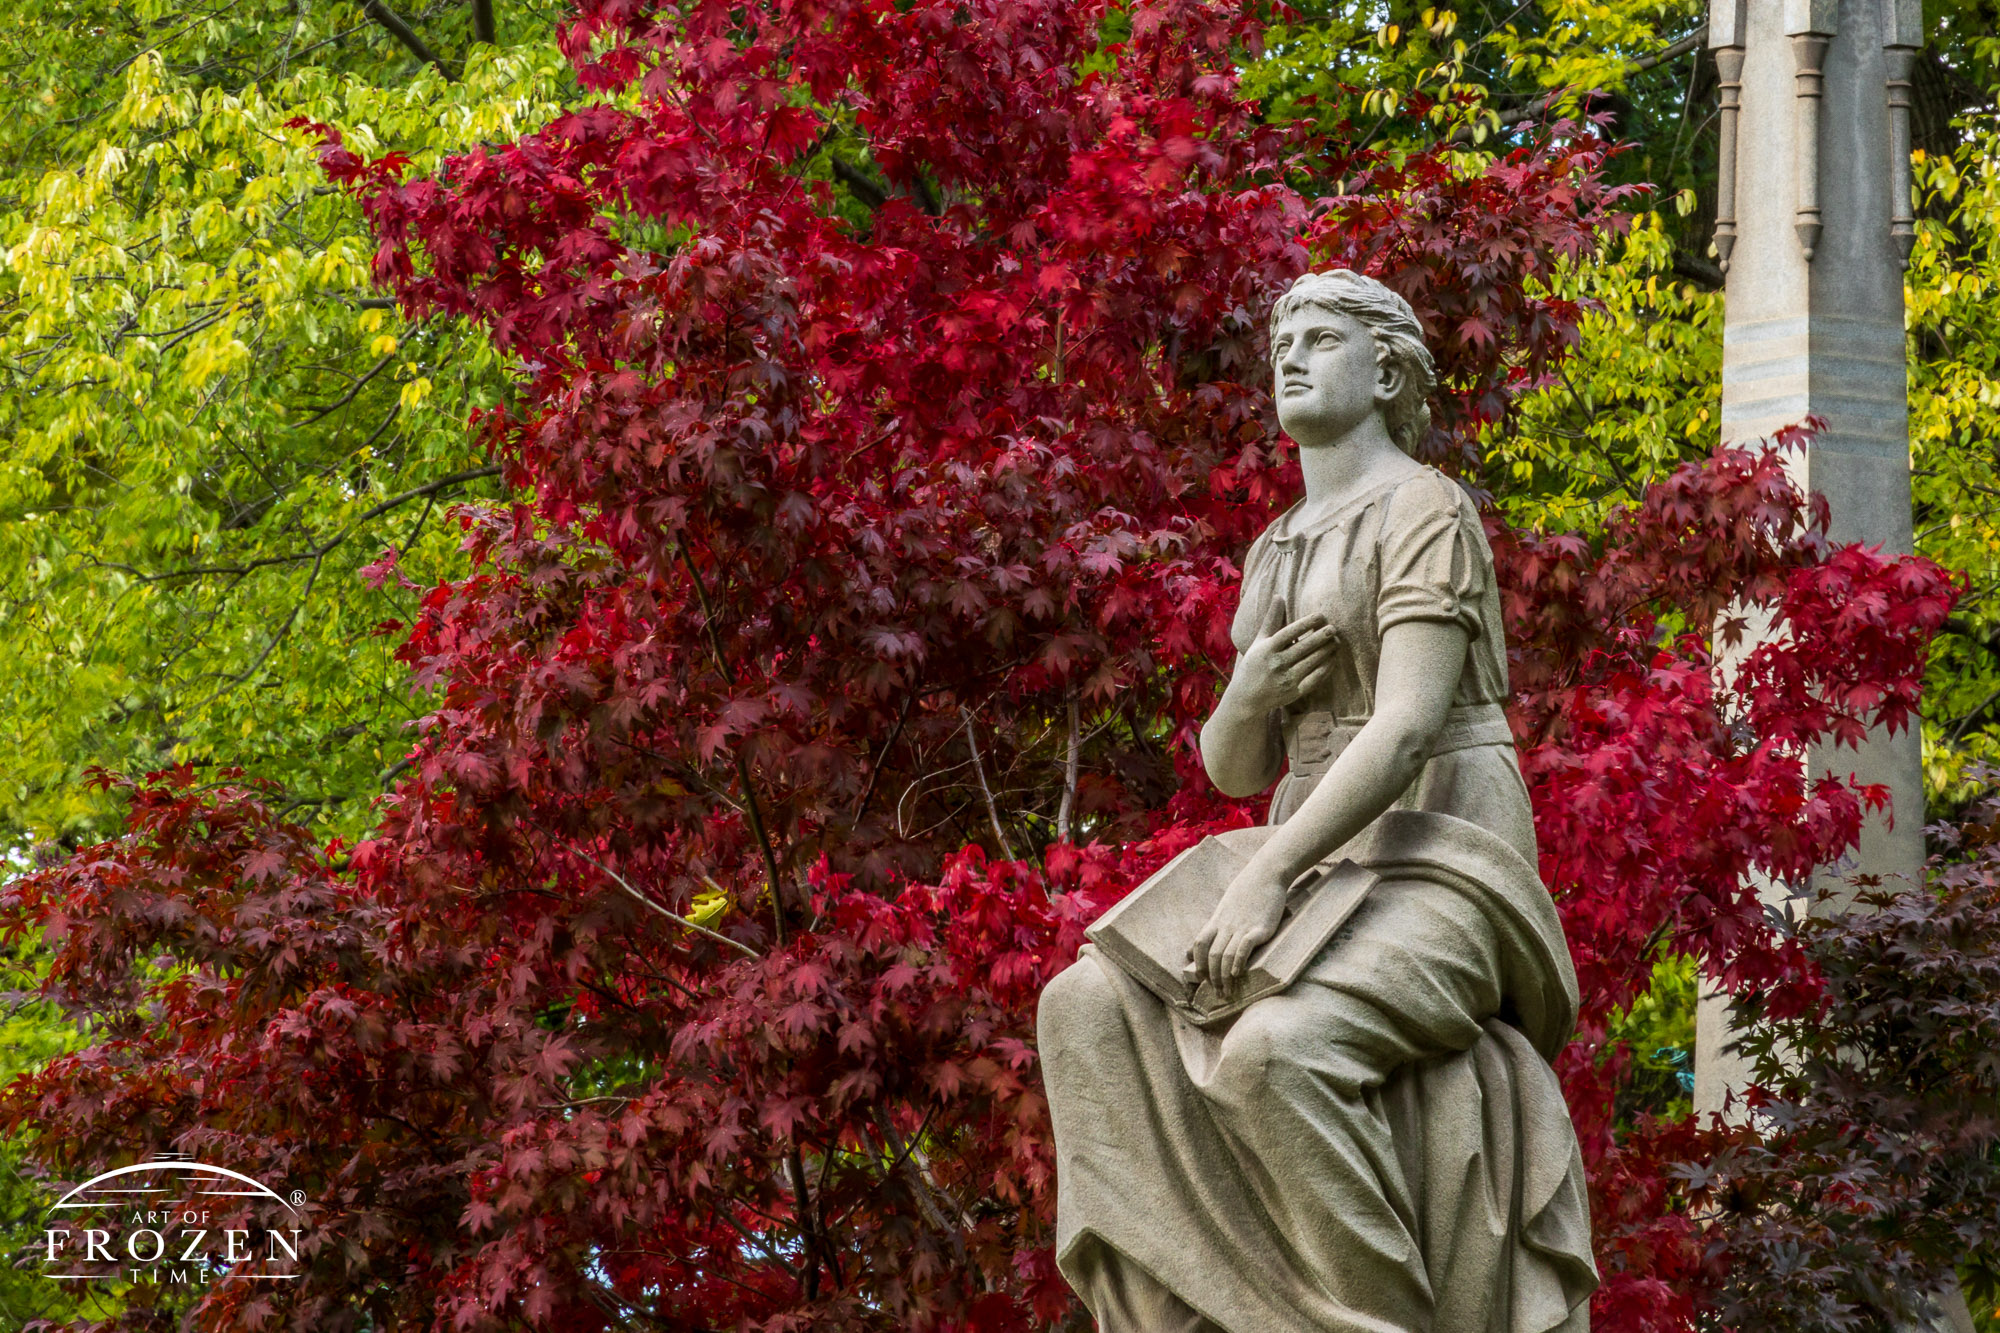 A stone sculpture of a human figure holding an open book while looking skyward as the surrounding trees take on their fall colors.